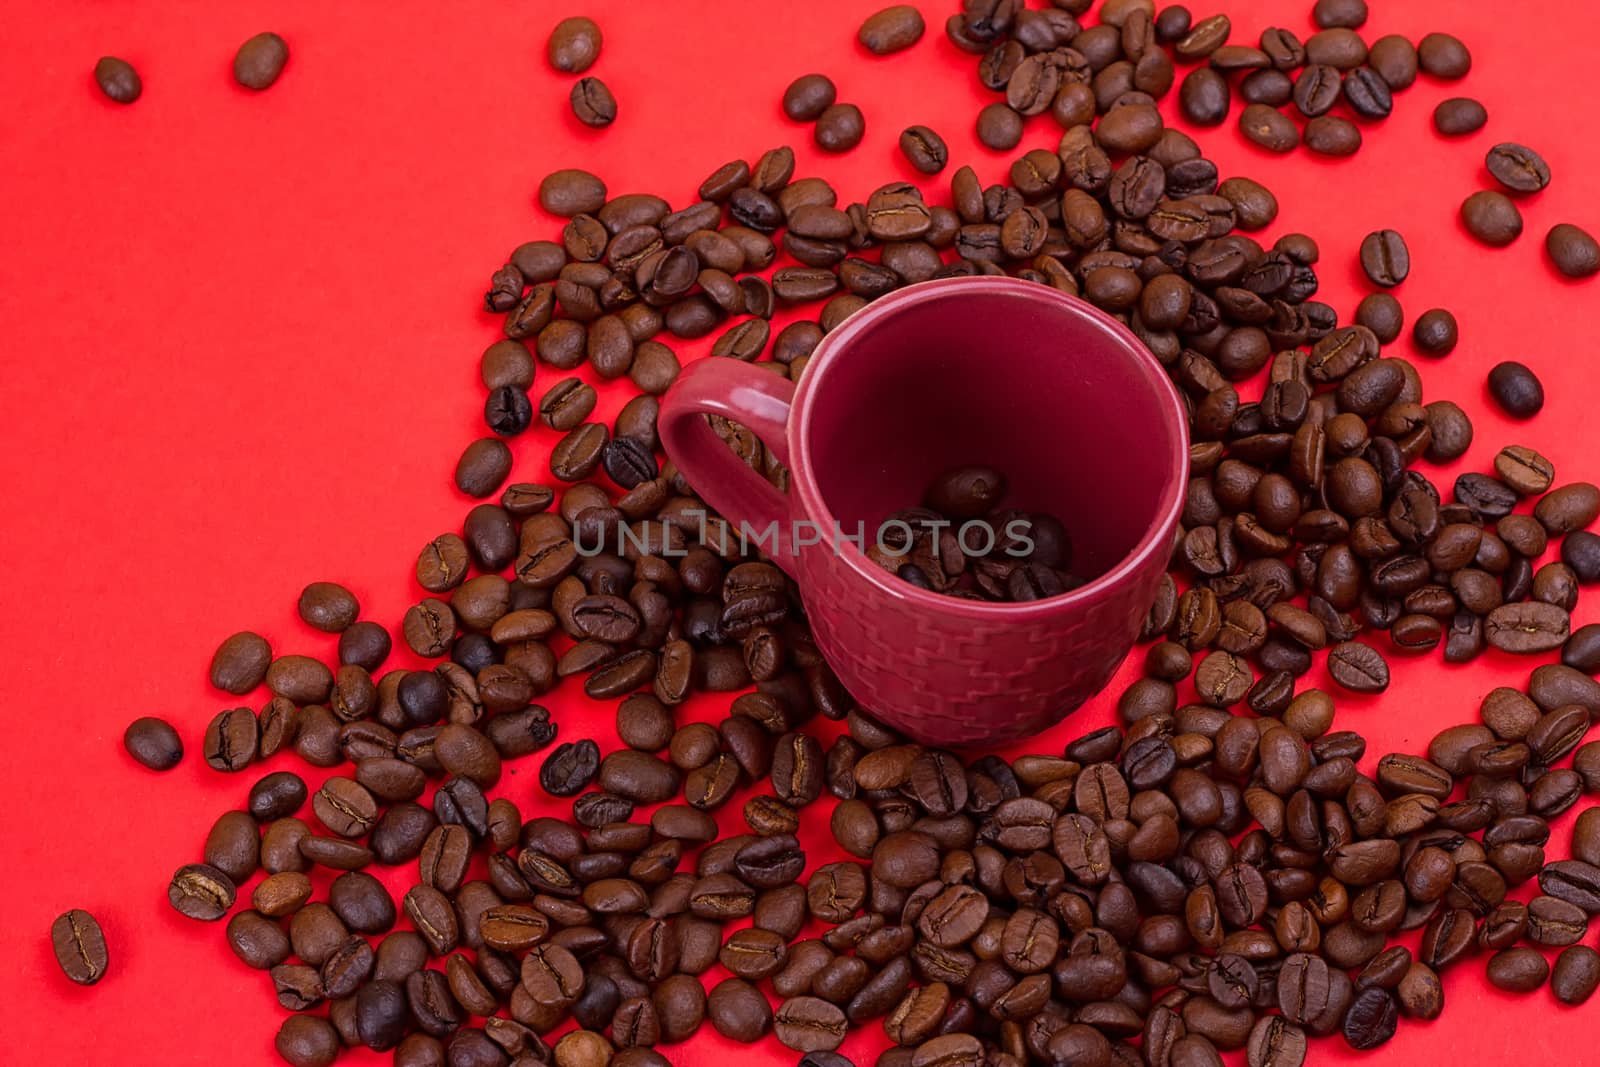 Empty coffee cup and coffee beans on a red background